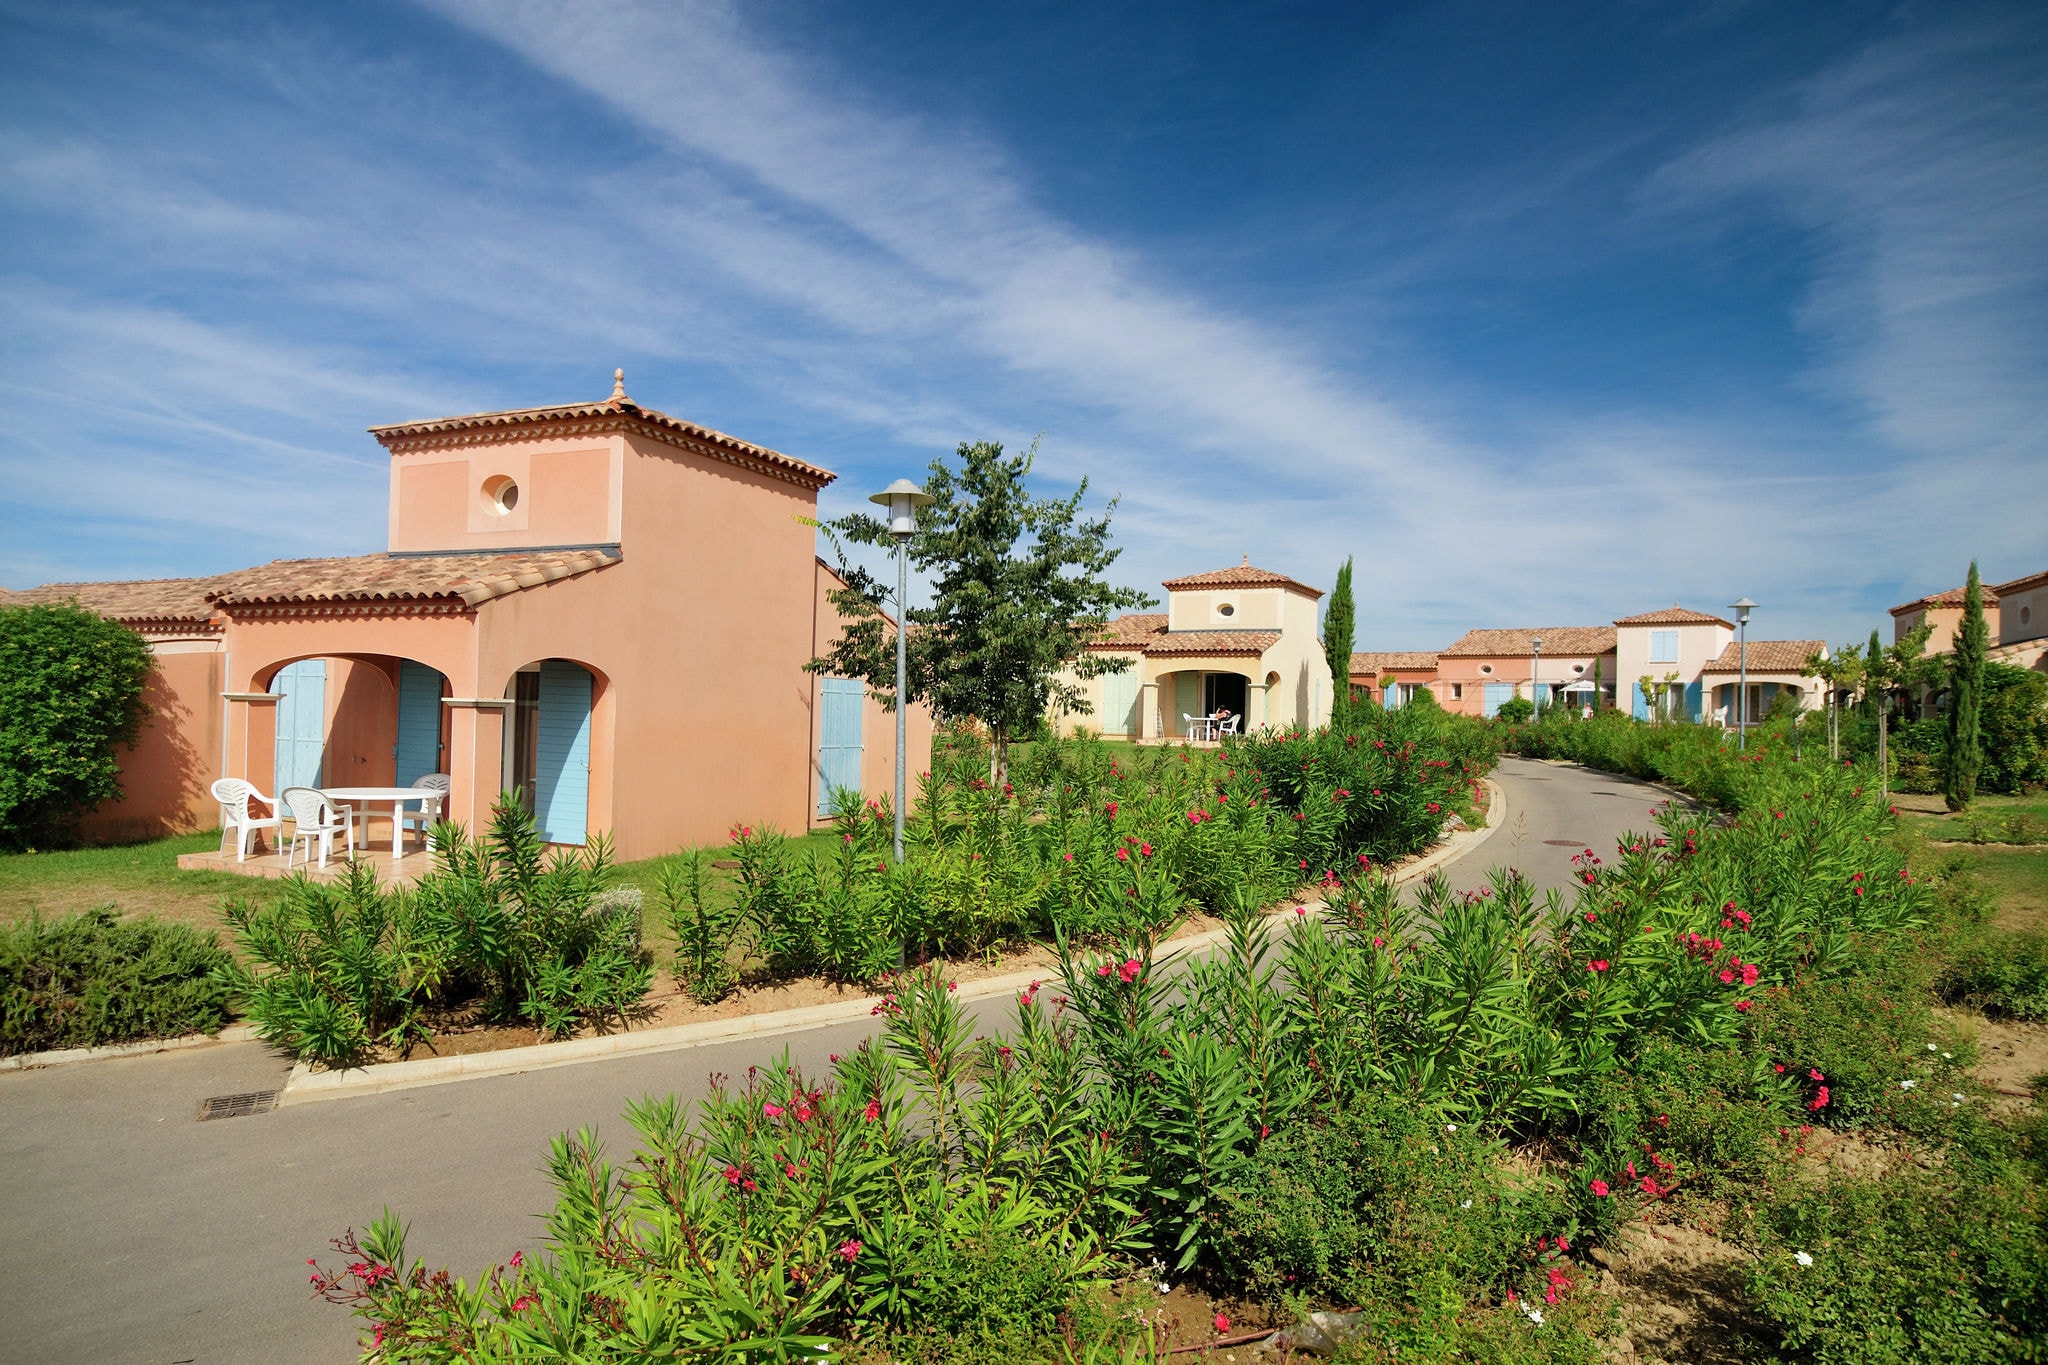 Attached house with terrace or loggia located in Languedoc